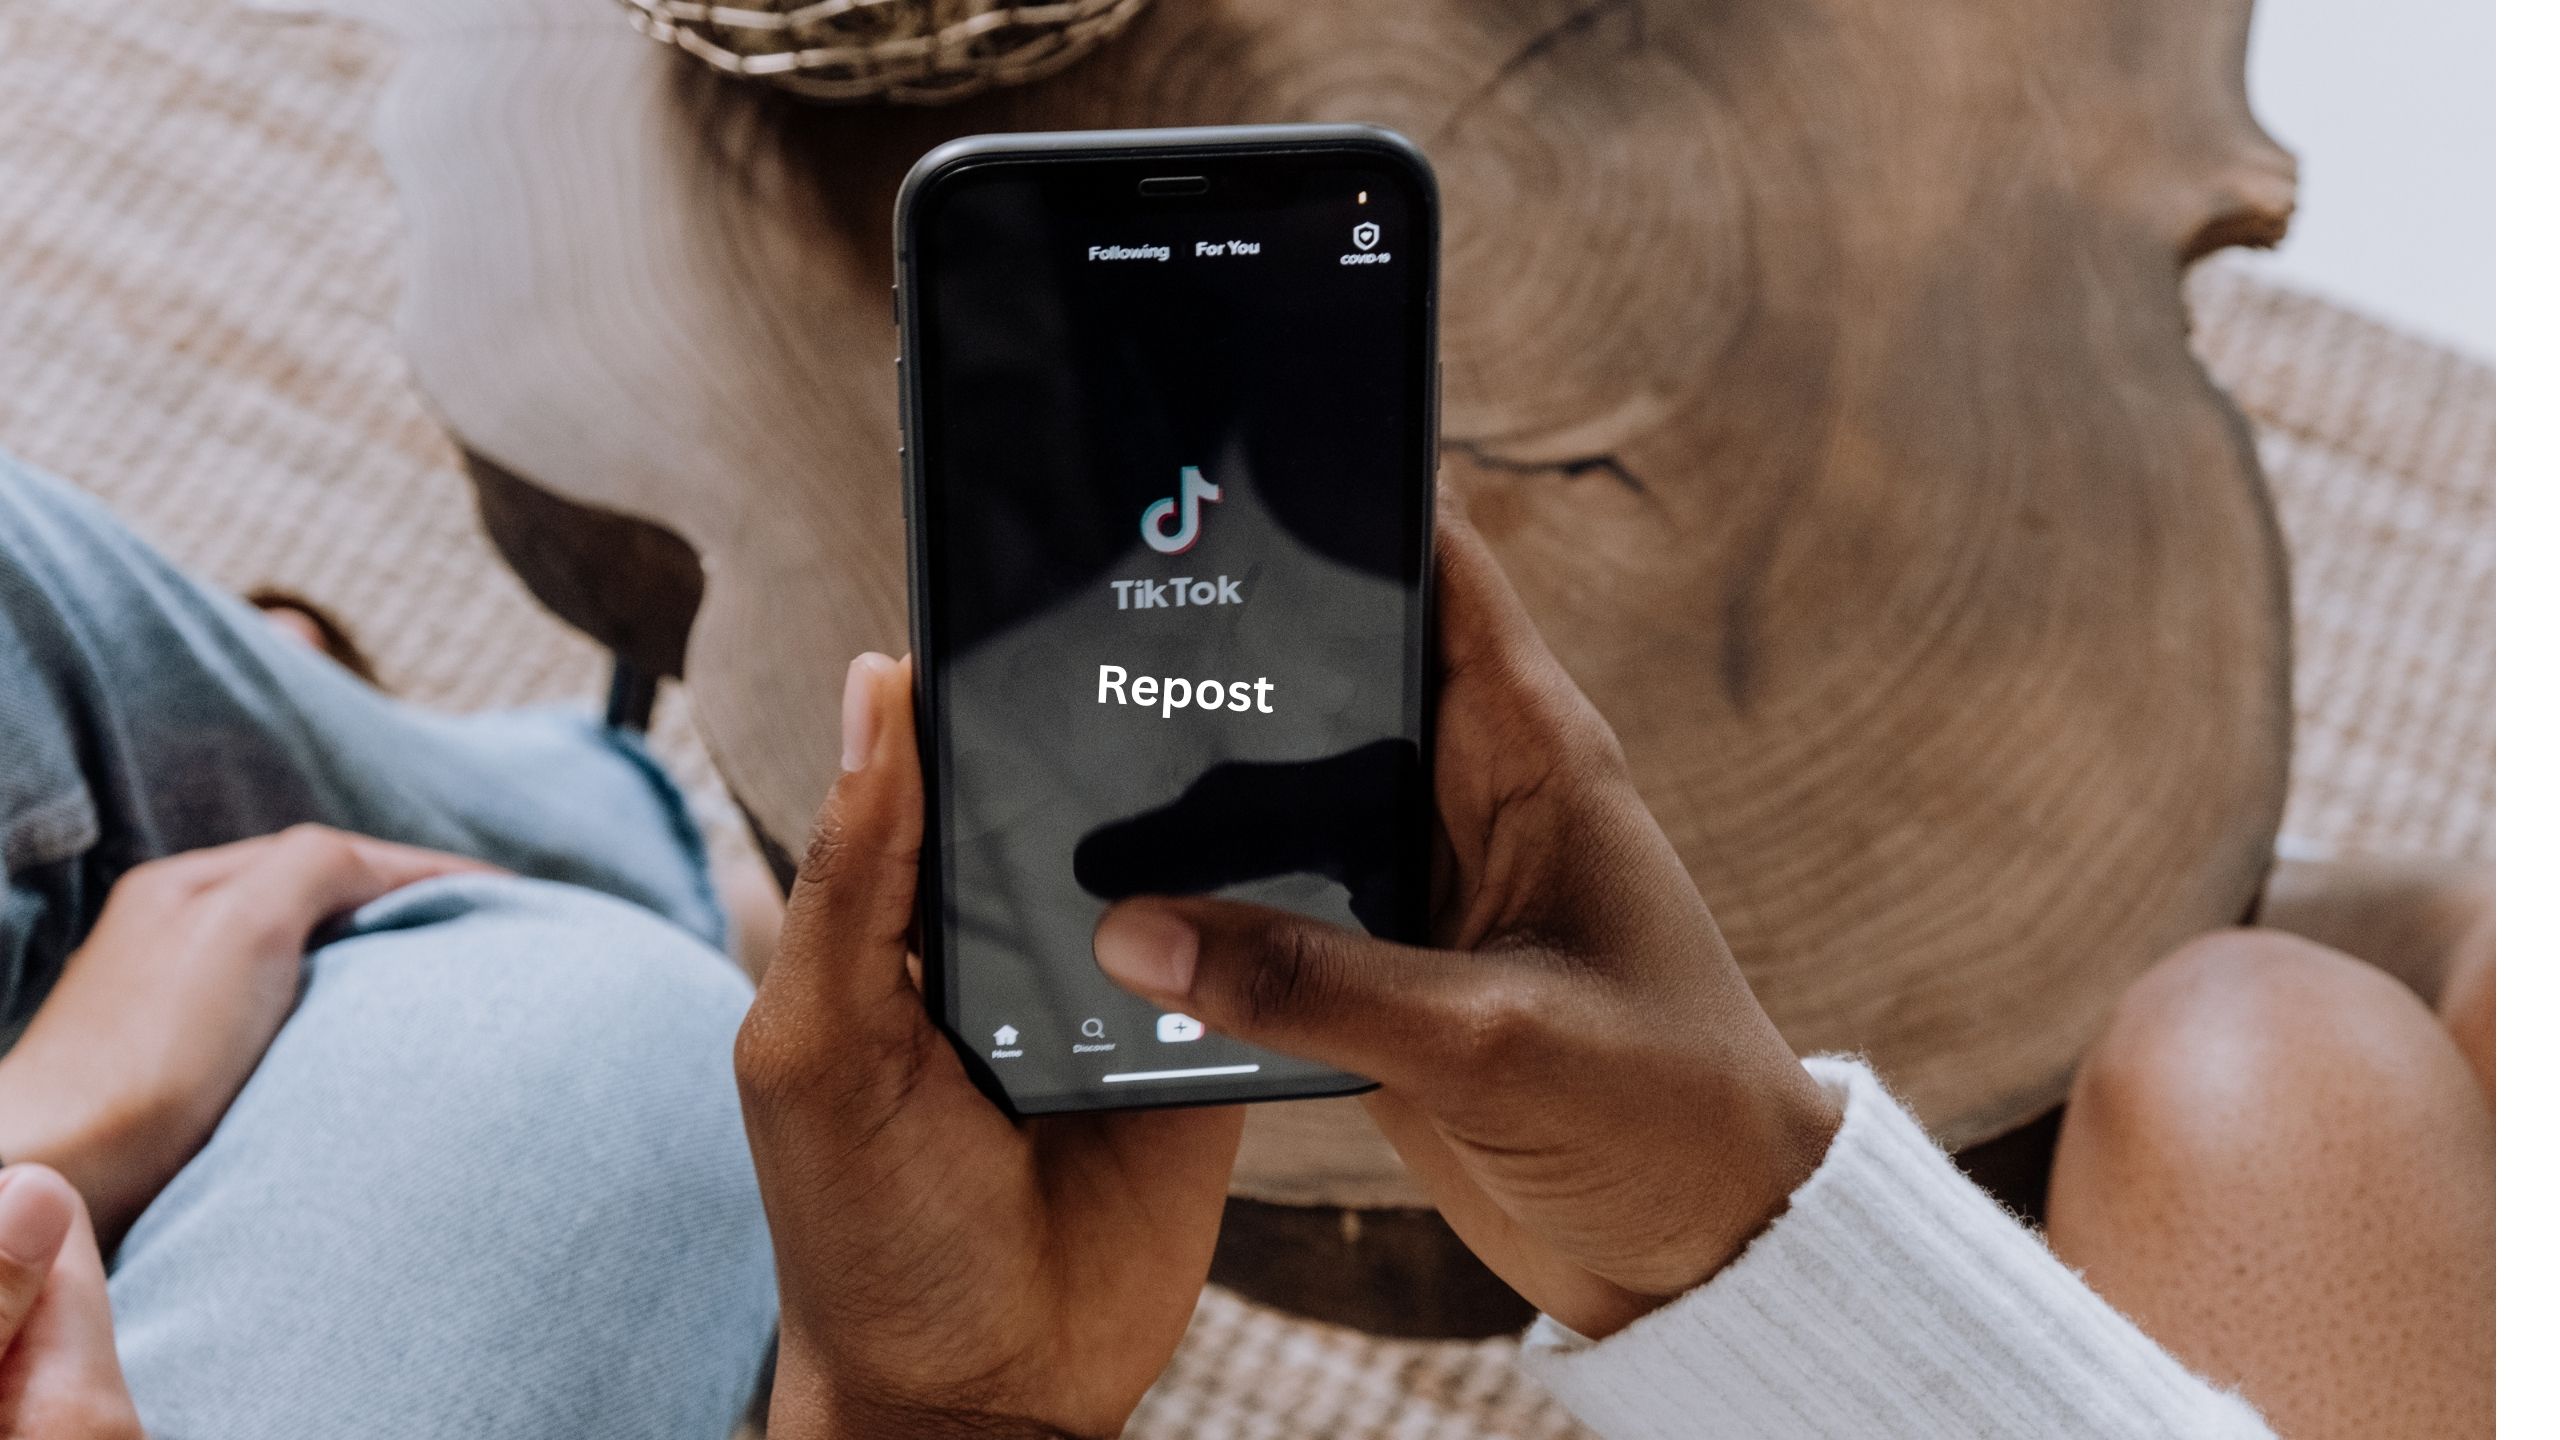 how to repost your own tiktok videos without watermark